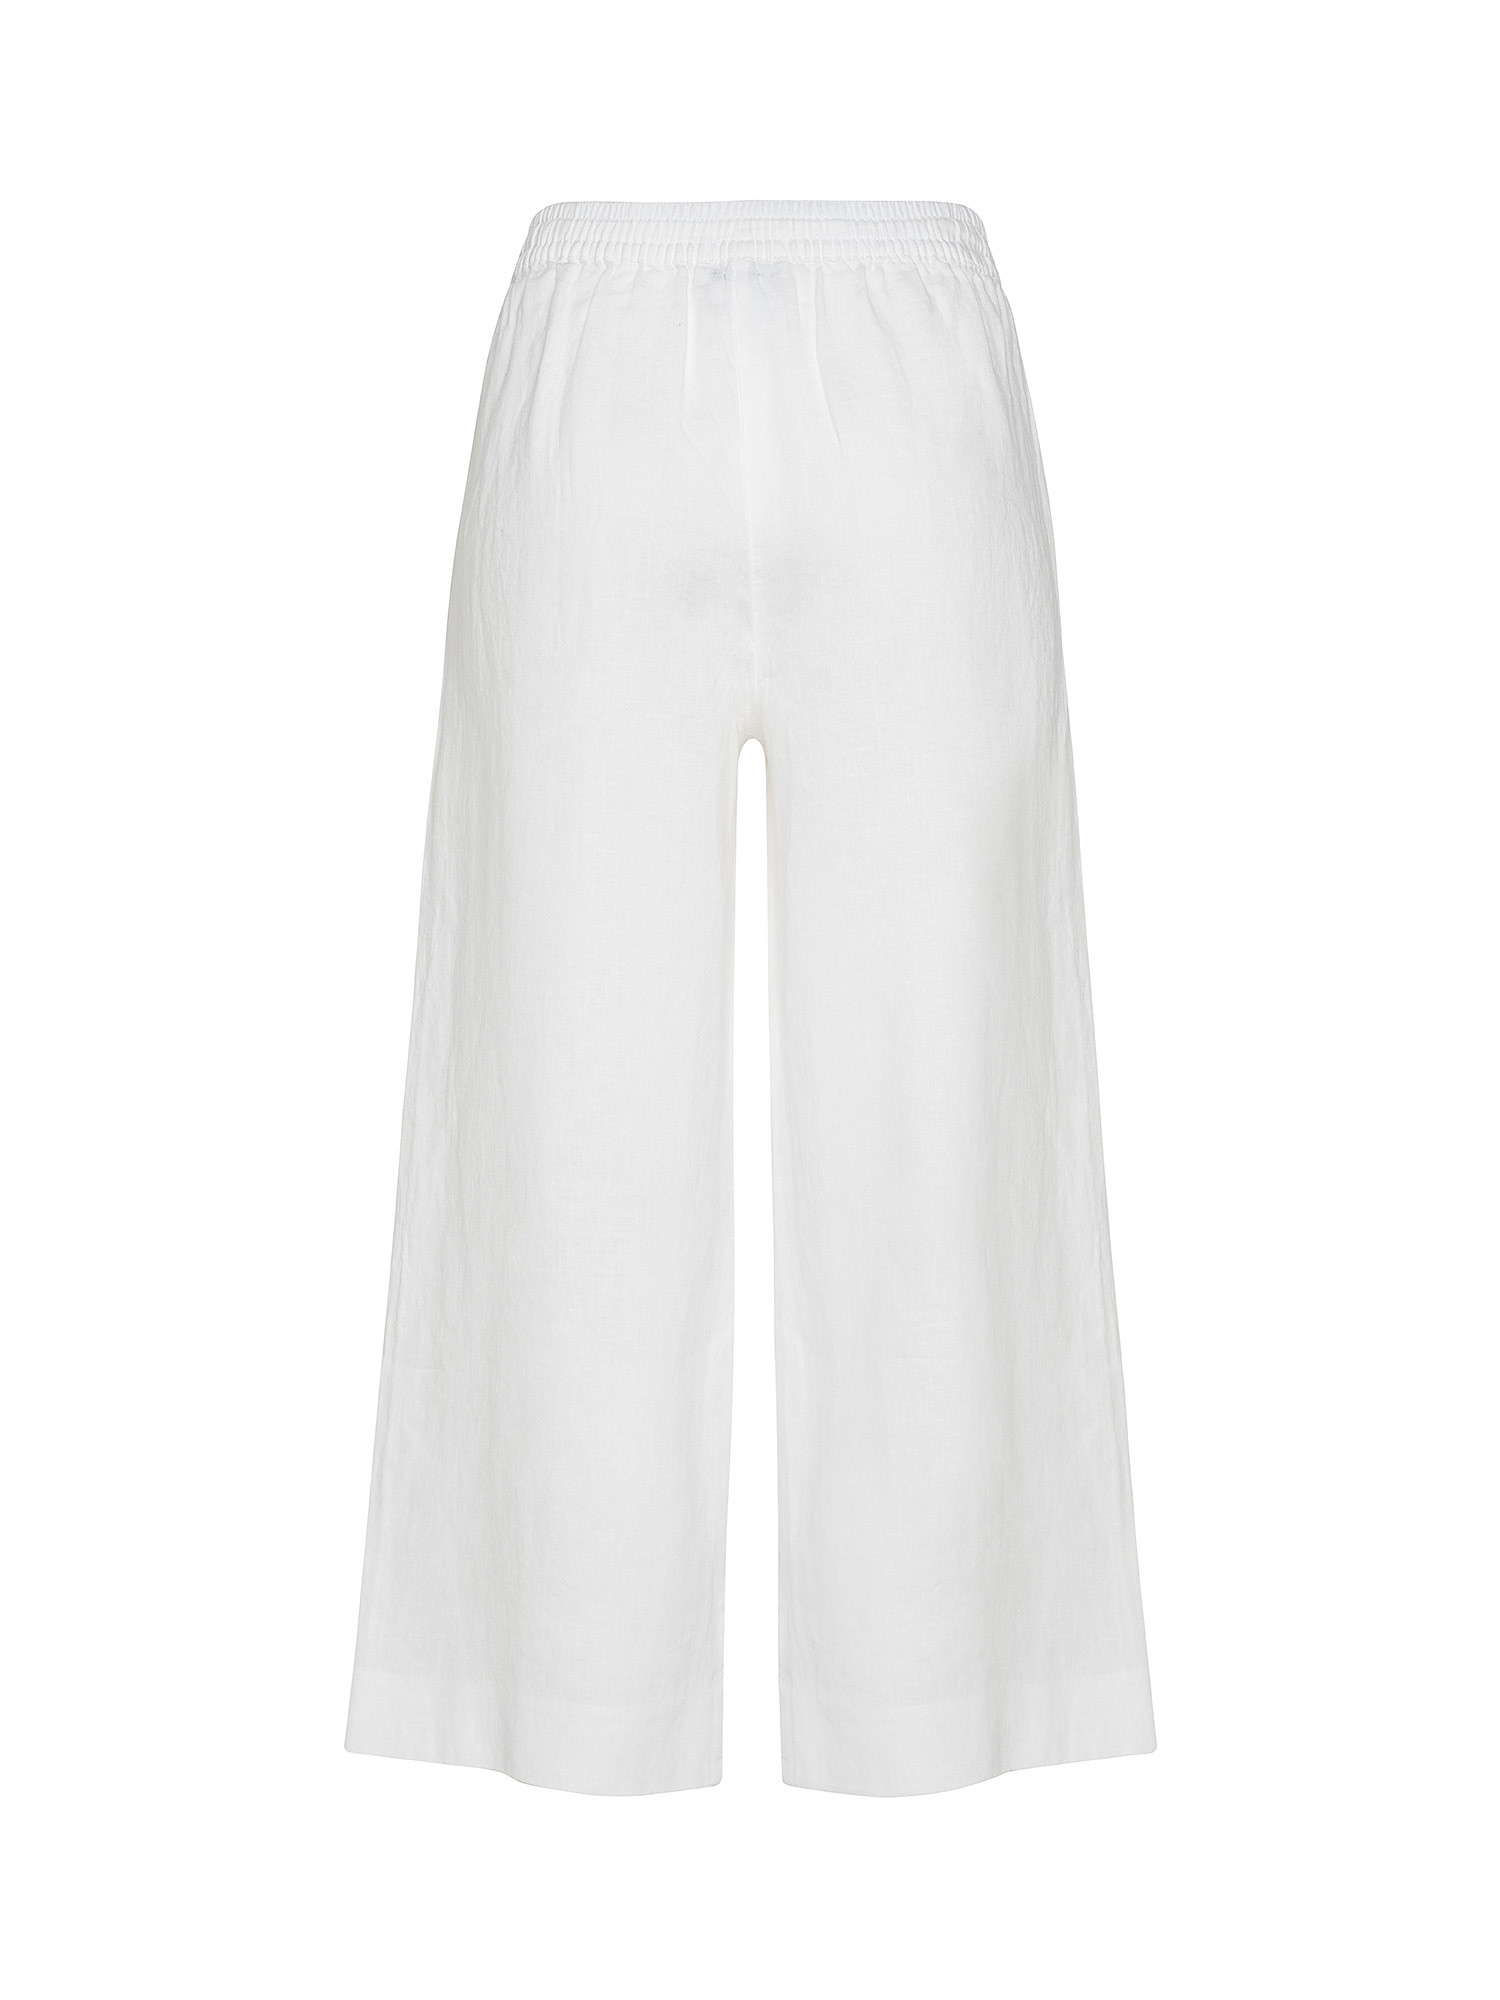 Wide leg linen trousers, White, large image number 1